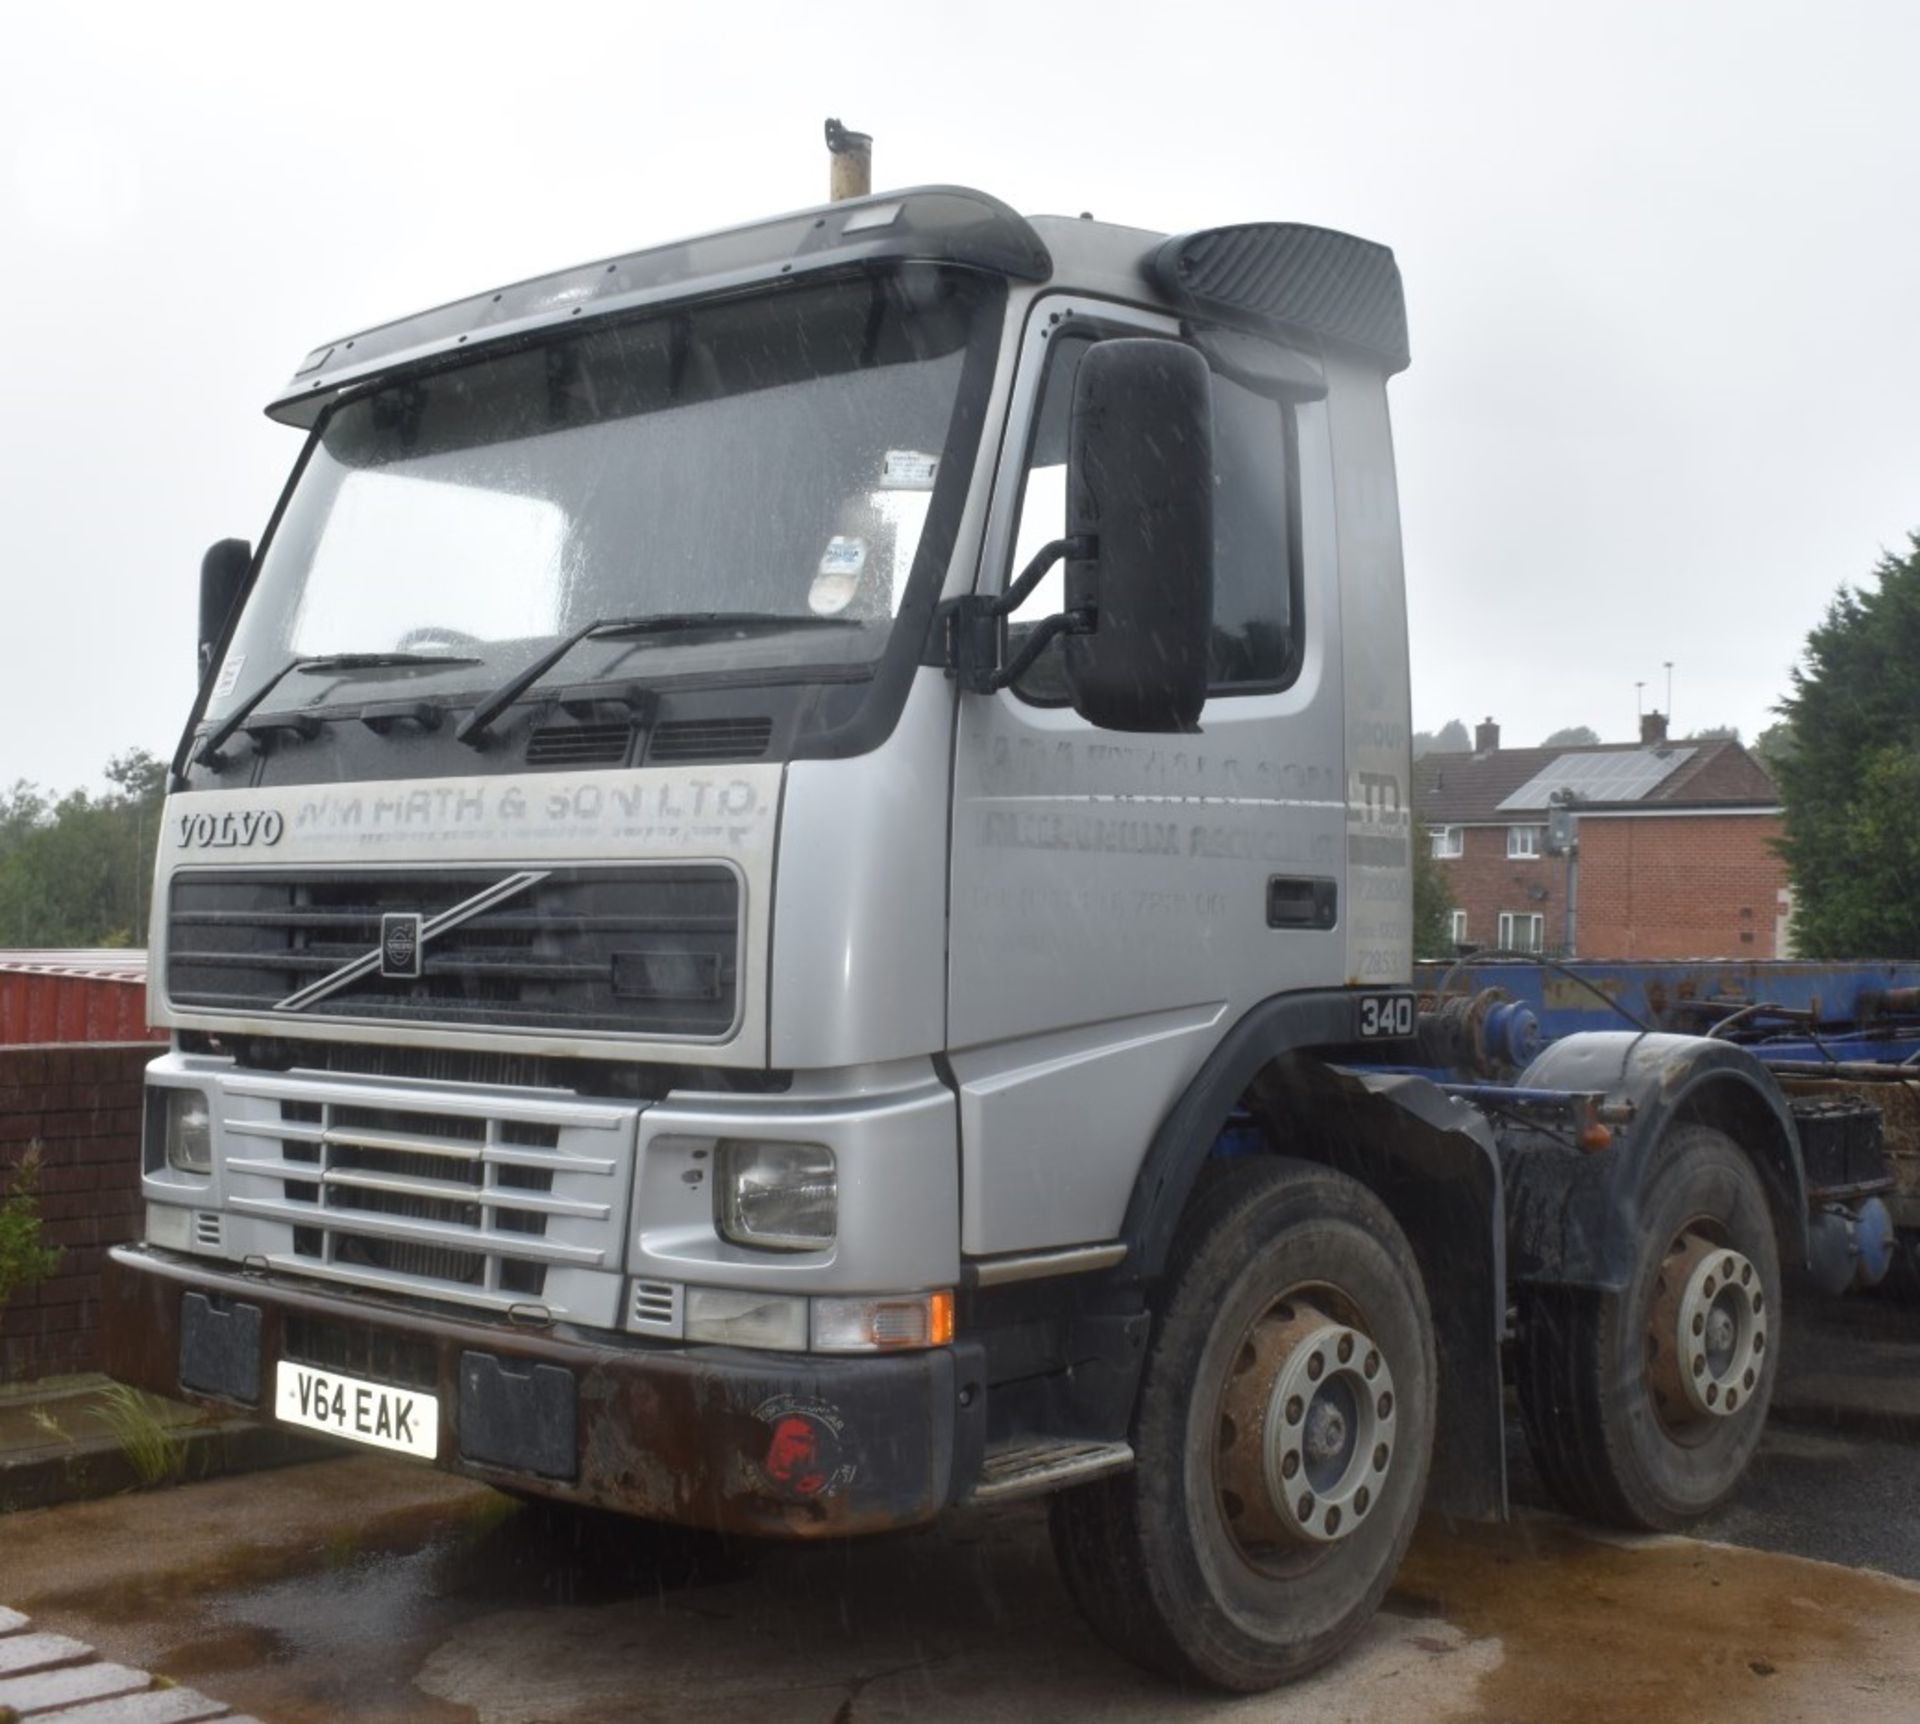 1 x Volvo 340 Plant Lorry With Tipper Chasis and Fitted Winch - CL547 - Location: South Yorkshire. - Image 2 of 25